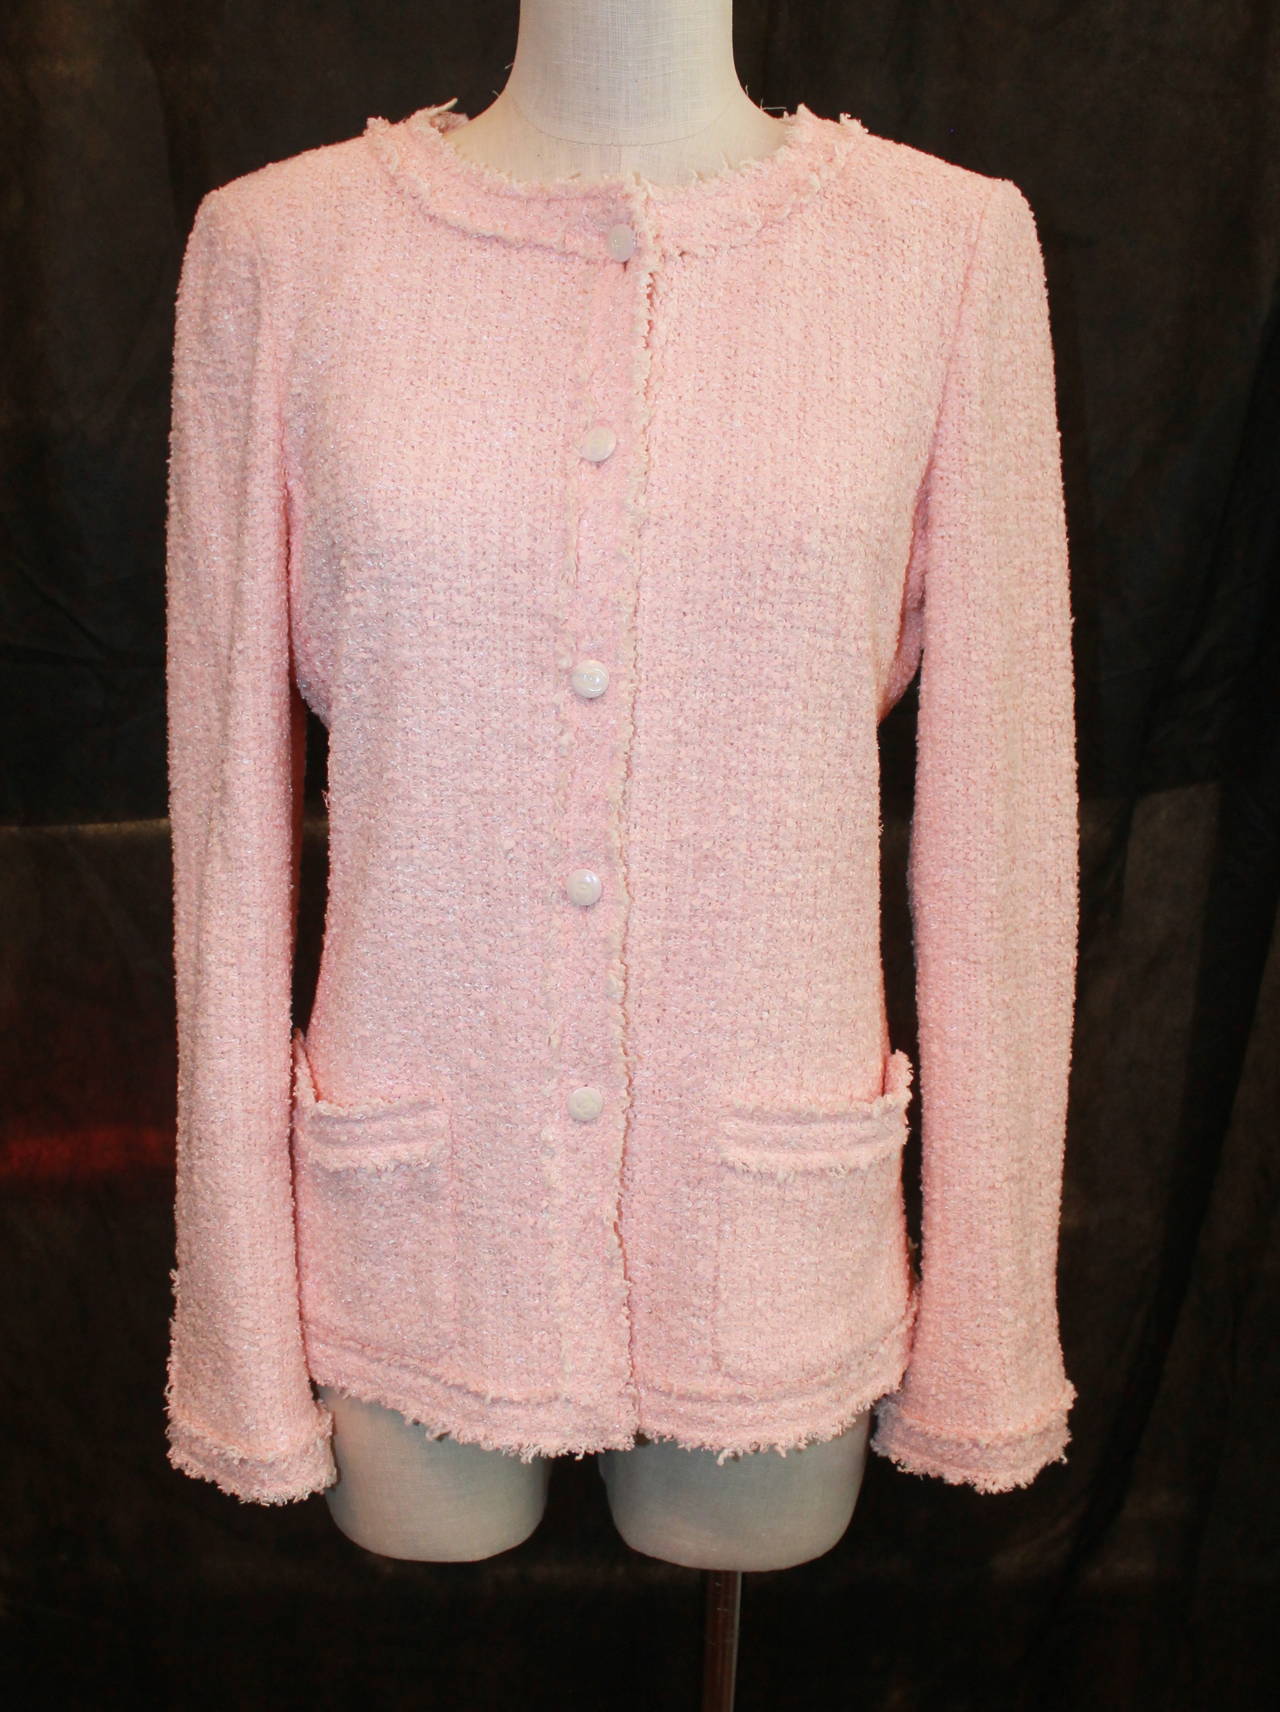 Chanel 2004 Pink Tweed & Textured Trim Jacket - 40. This jacket is in excellent condition with minor wear. 

Measurements:
Bust- 34.5